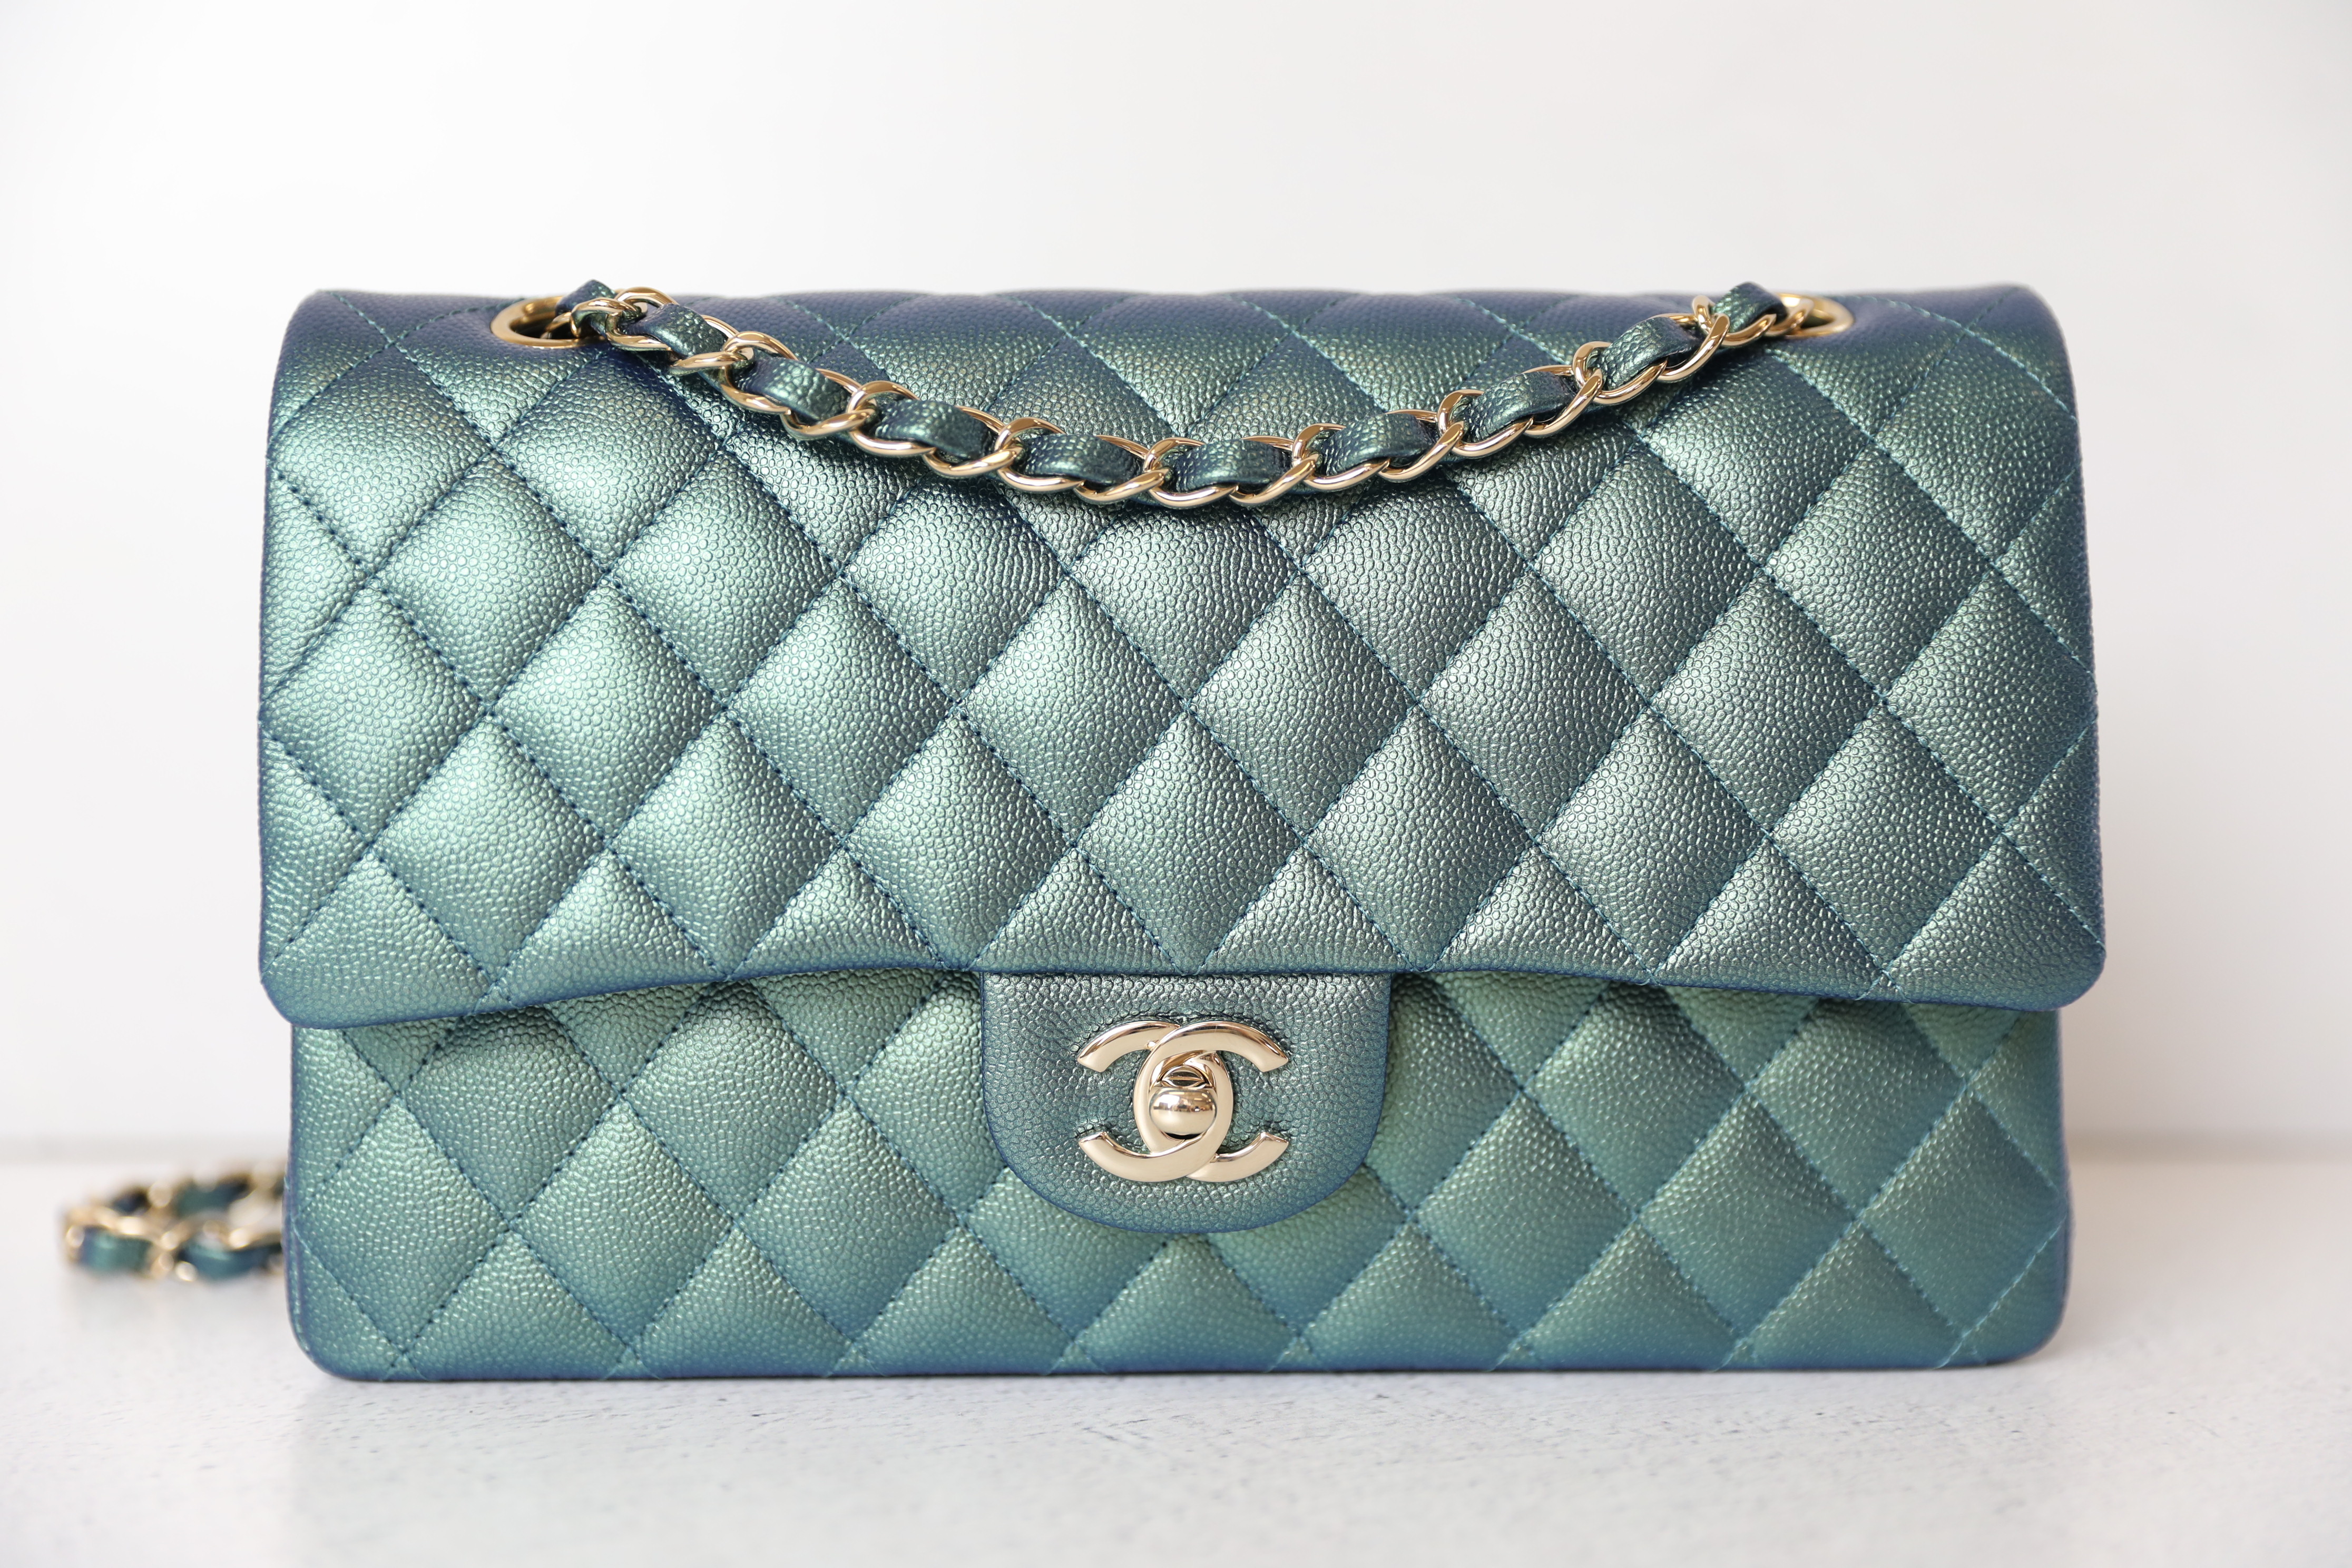 Chanel Classic Medium Double Flap, 22P Iridescent Green Caviar Leather with Gold  Hardware, Preowned in Box WA001 - Julia Rose Boston